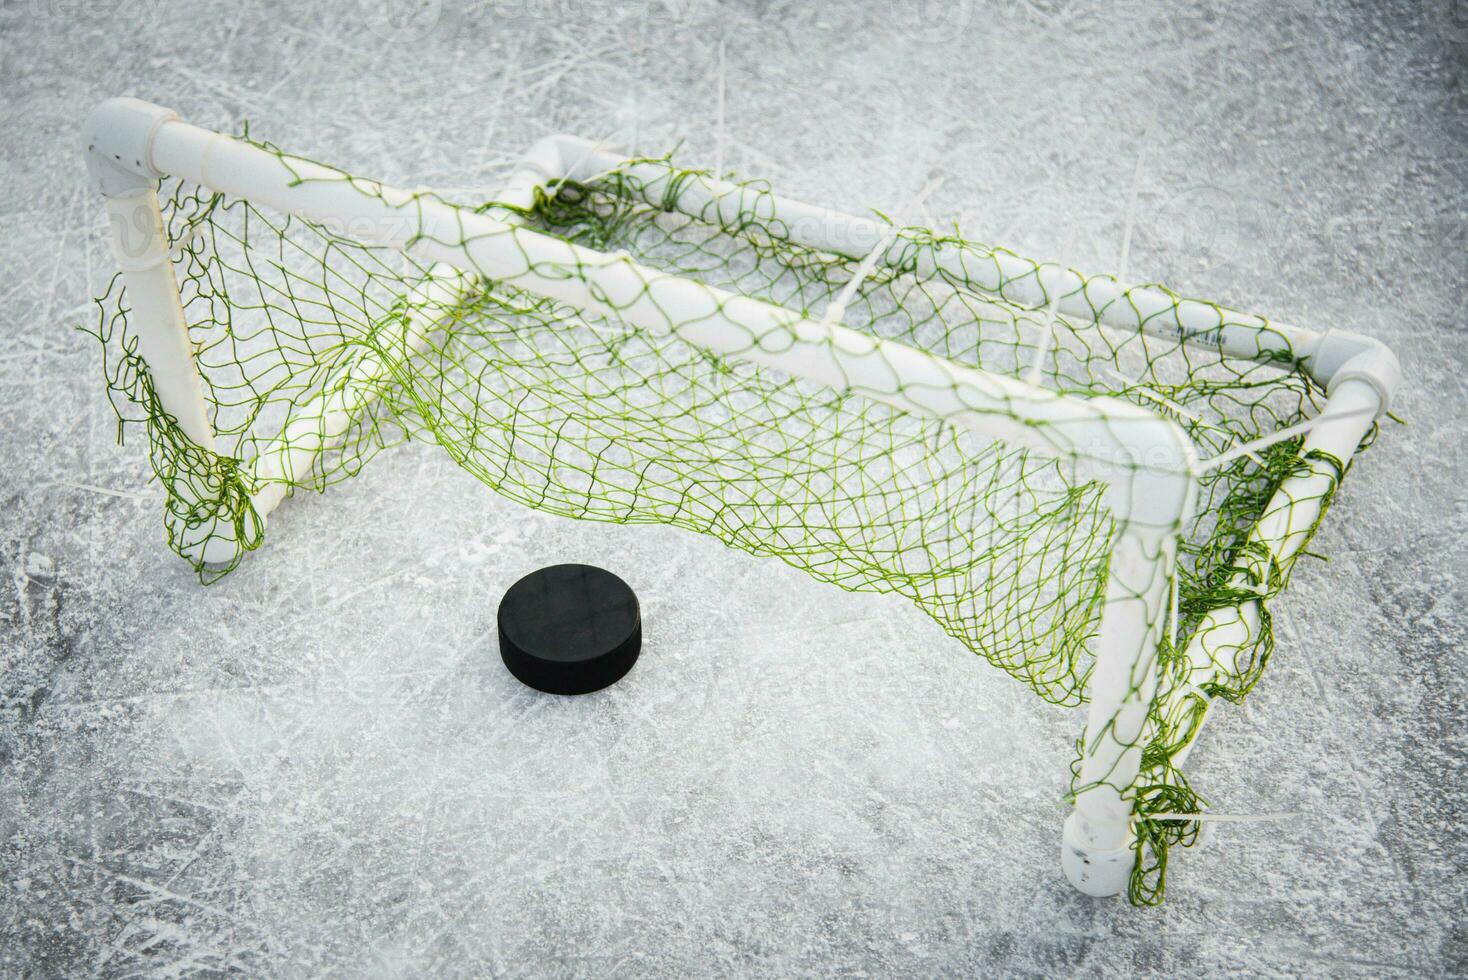 goal scored by a hockey puck in the goal net photo